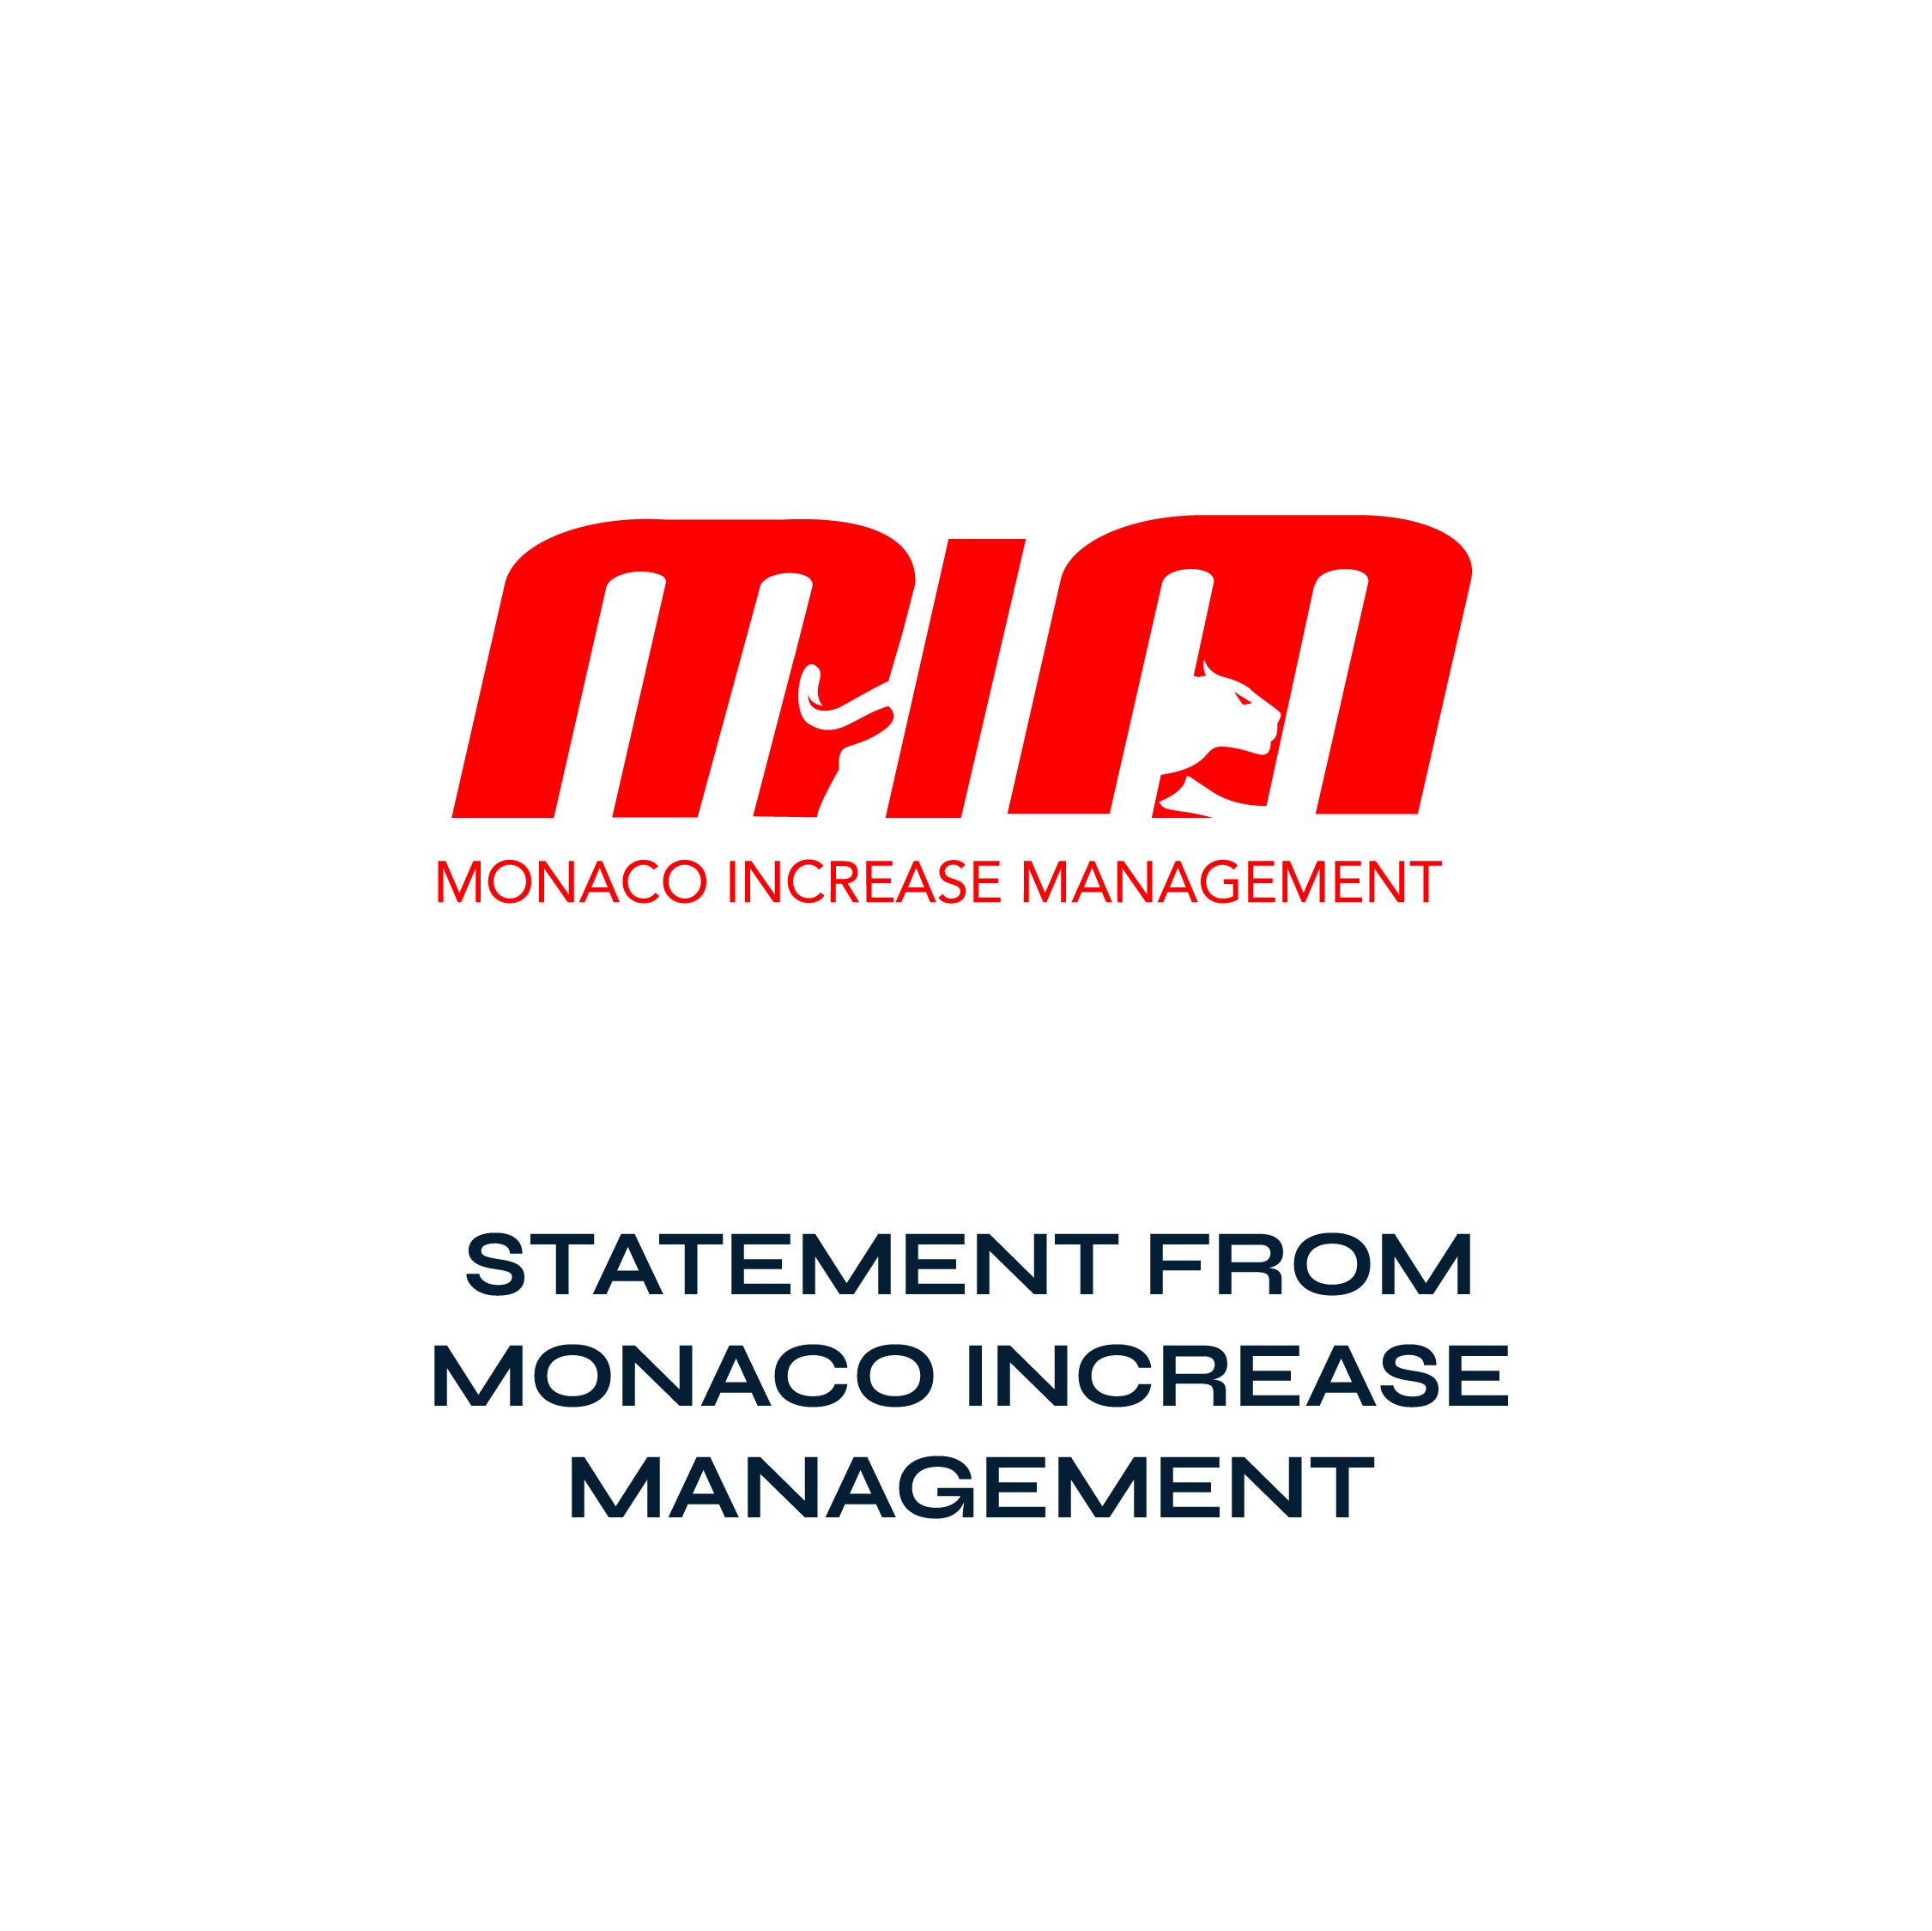 Statement from Monaco Increase Management